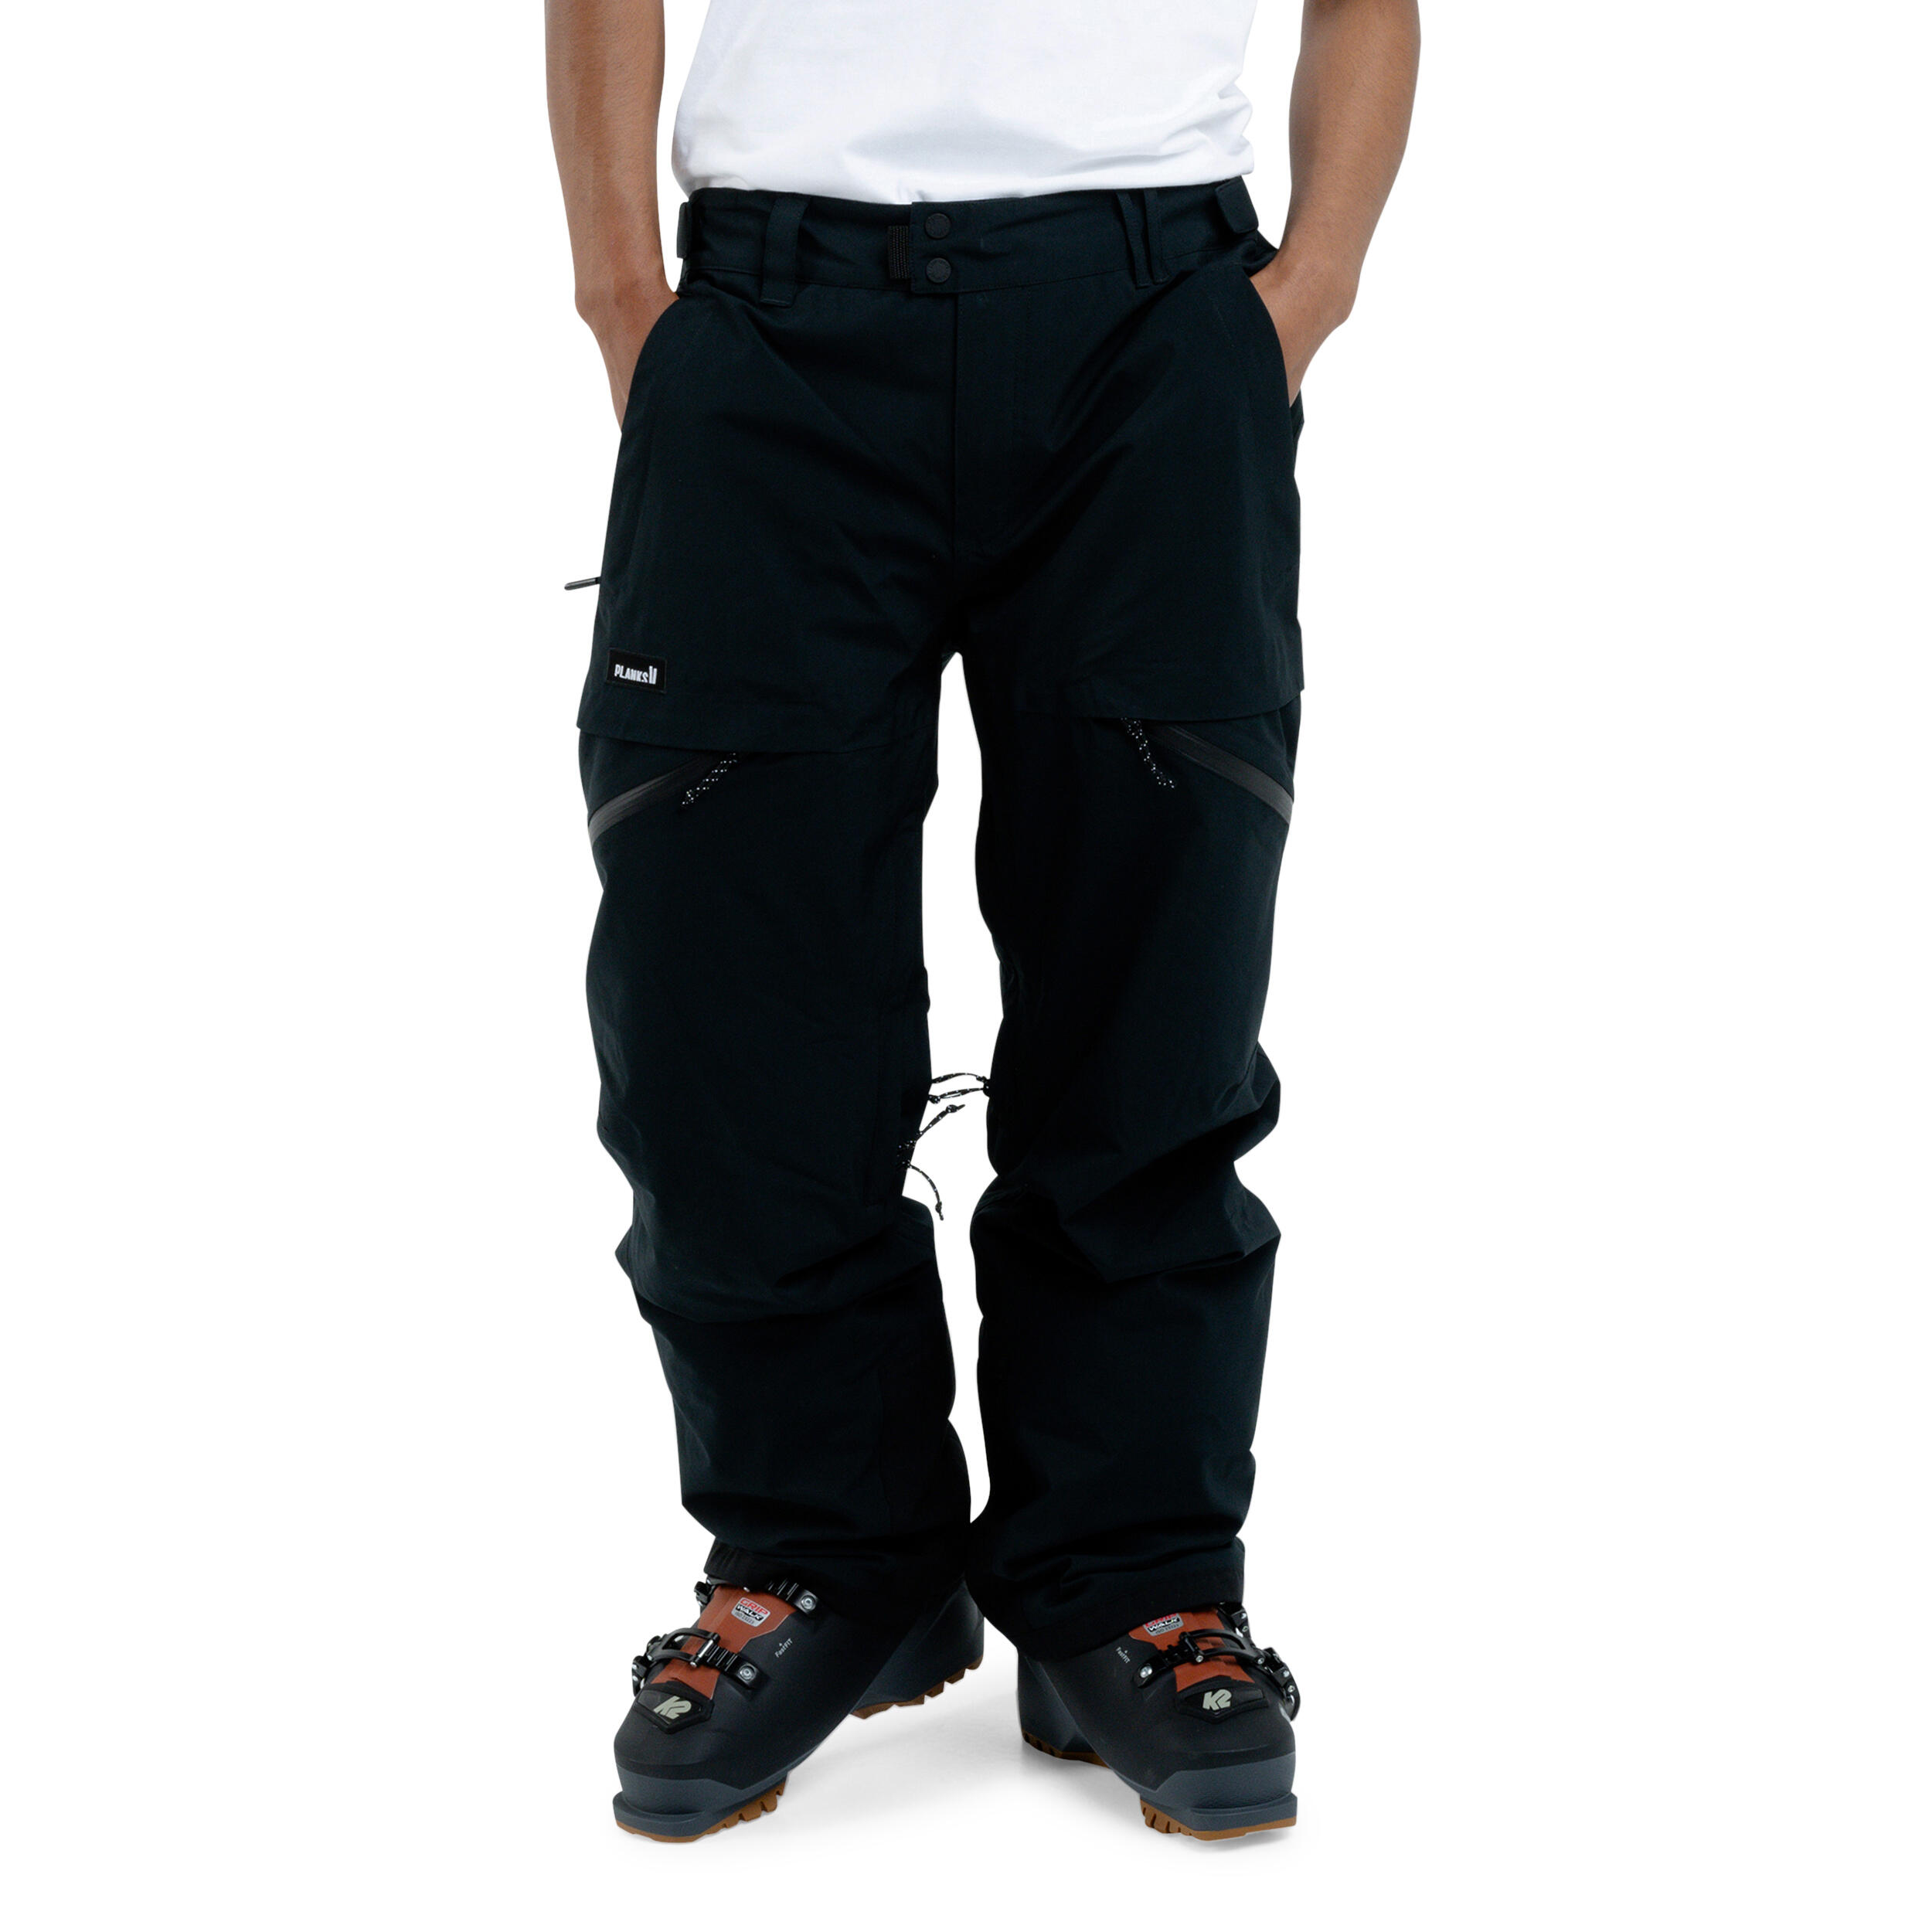 PLANKS Planks Good Times Men's Insulated Ski Pants in Black Thermal Winter Trousers